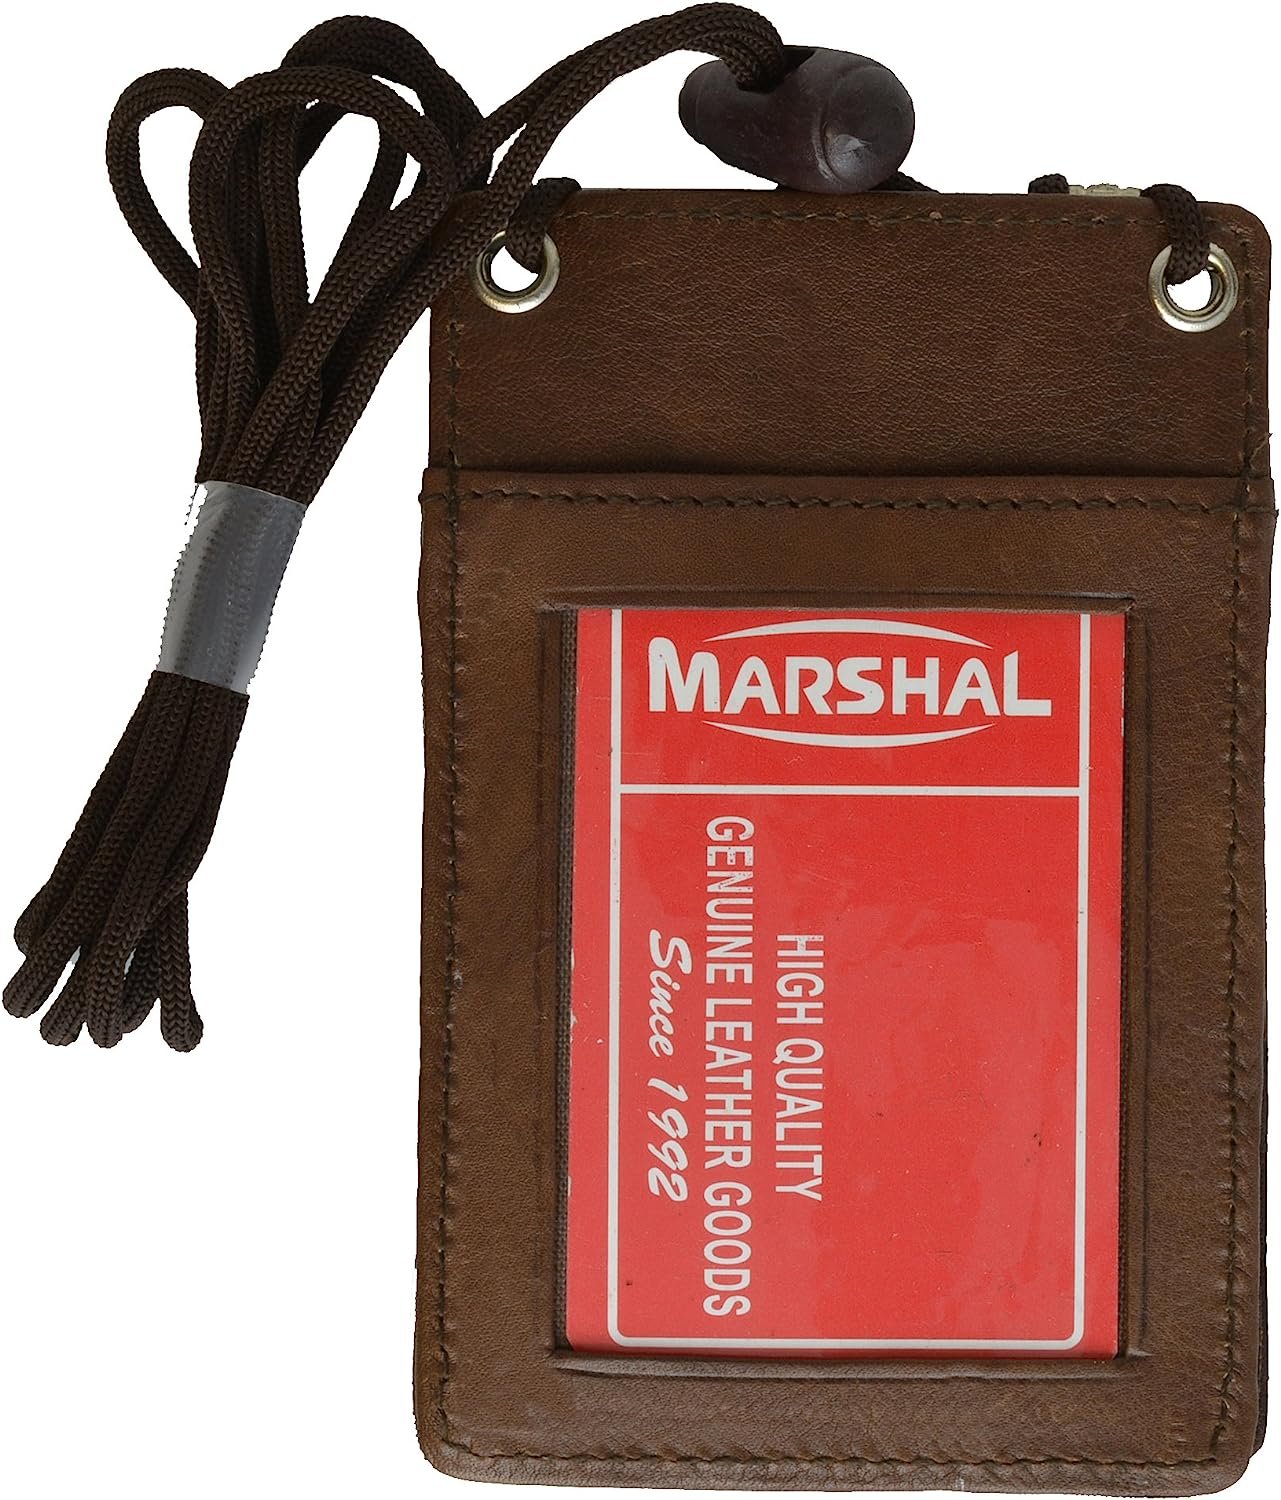 Marshal New Leather Neck Strap ID Badge Credit Card Holder Pouch Wallet Mini CrossBody (Brown)